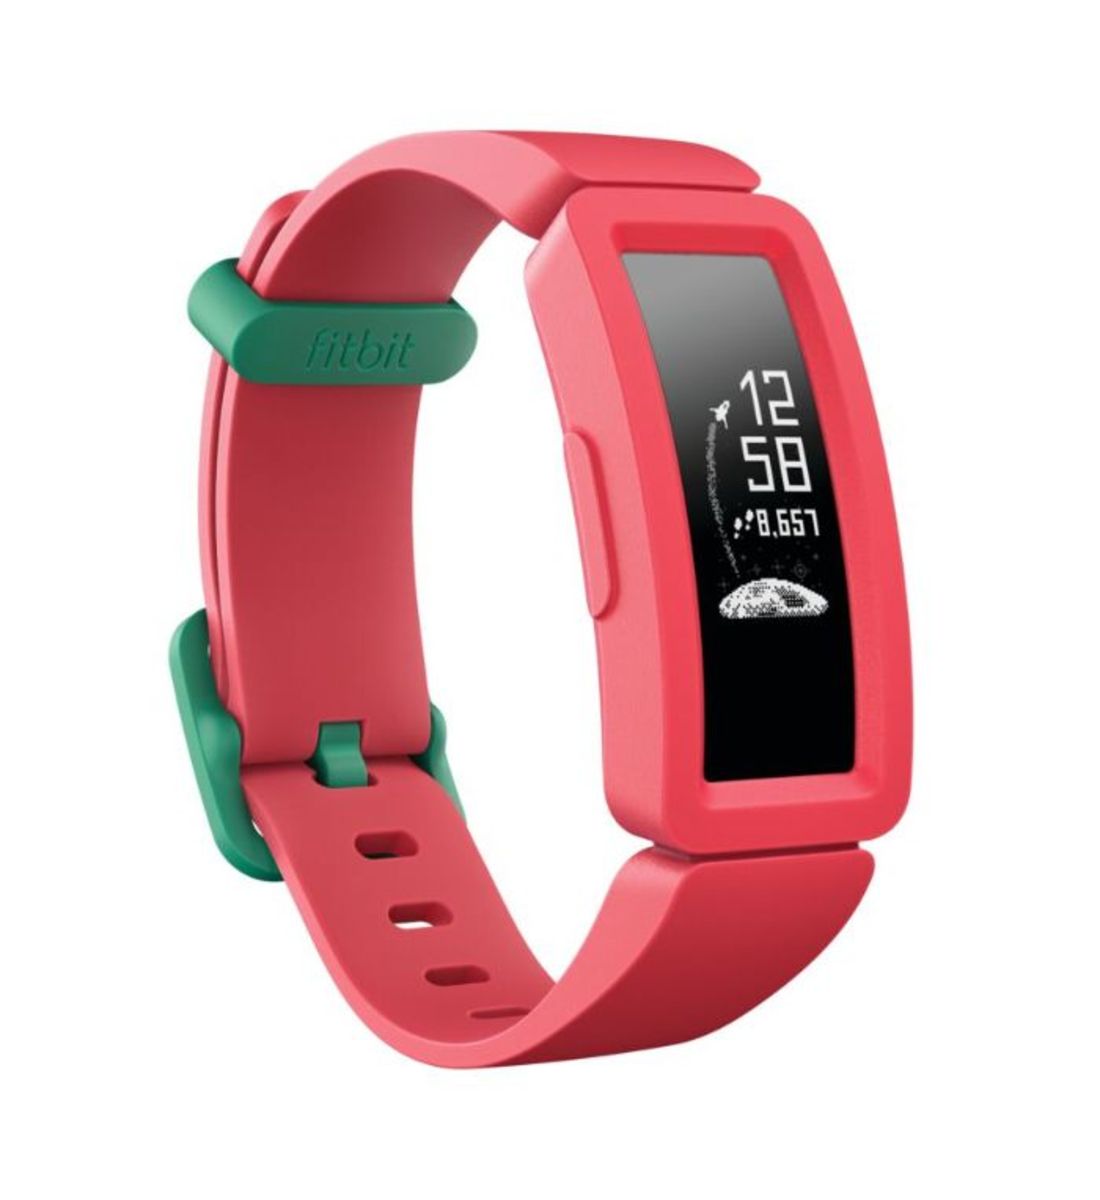 Fitbit Ace 2 Activity Tracker for Kids 6+, Watermelon/Teal Clasp,One Size - image 1 of 6